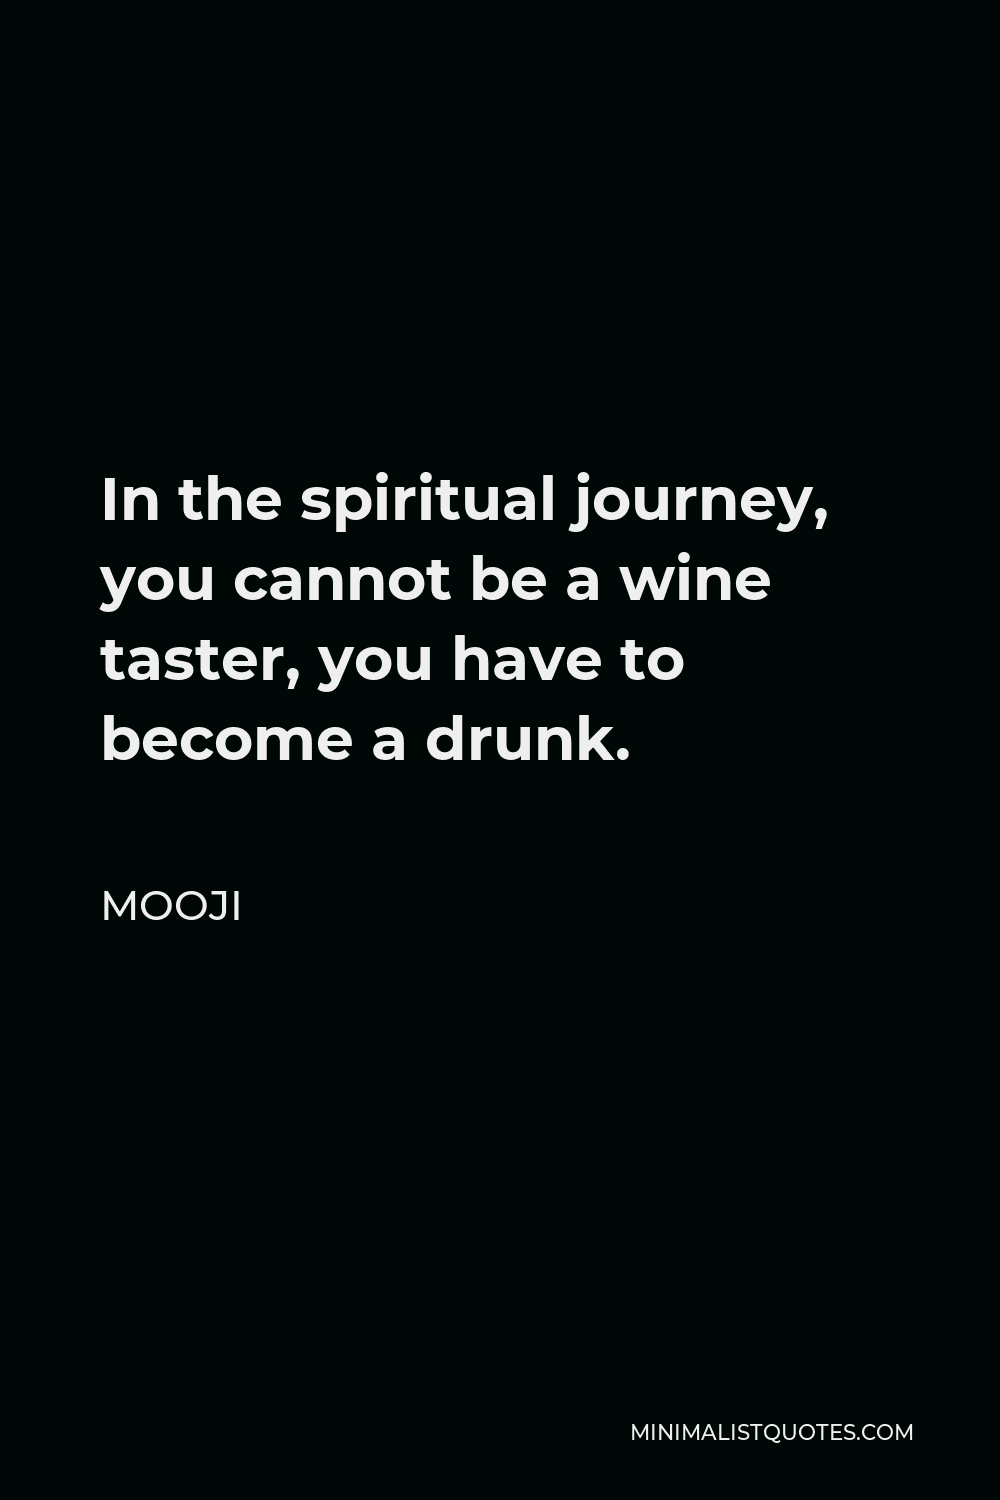 Mooji Quote - In the spiritual journey, you cannot be a wine taster, you have to become a drunk.